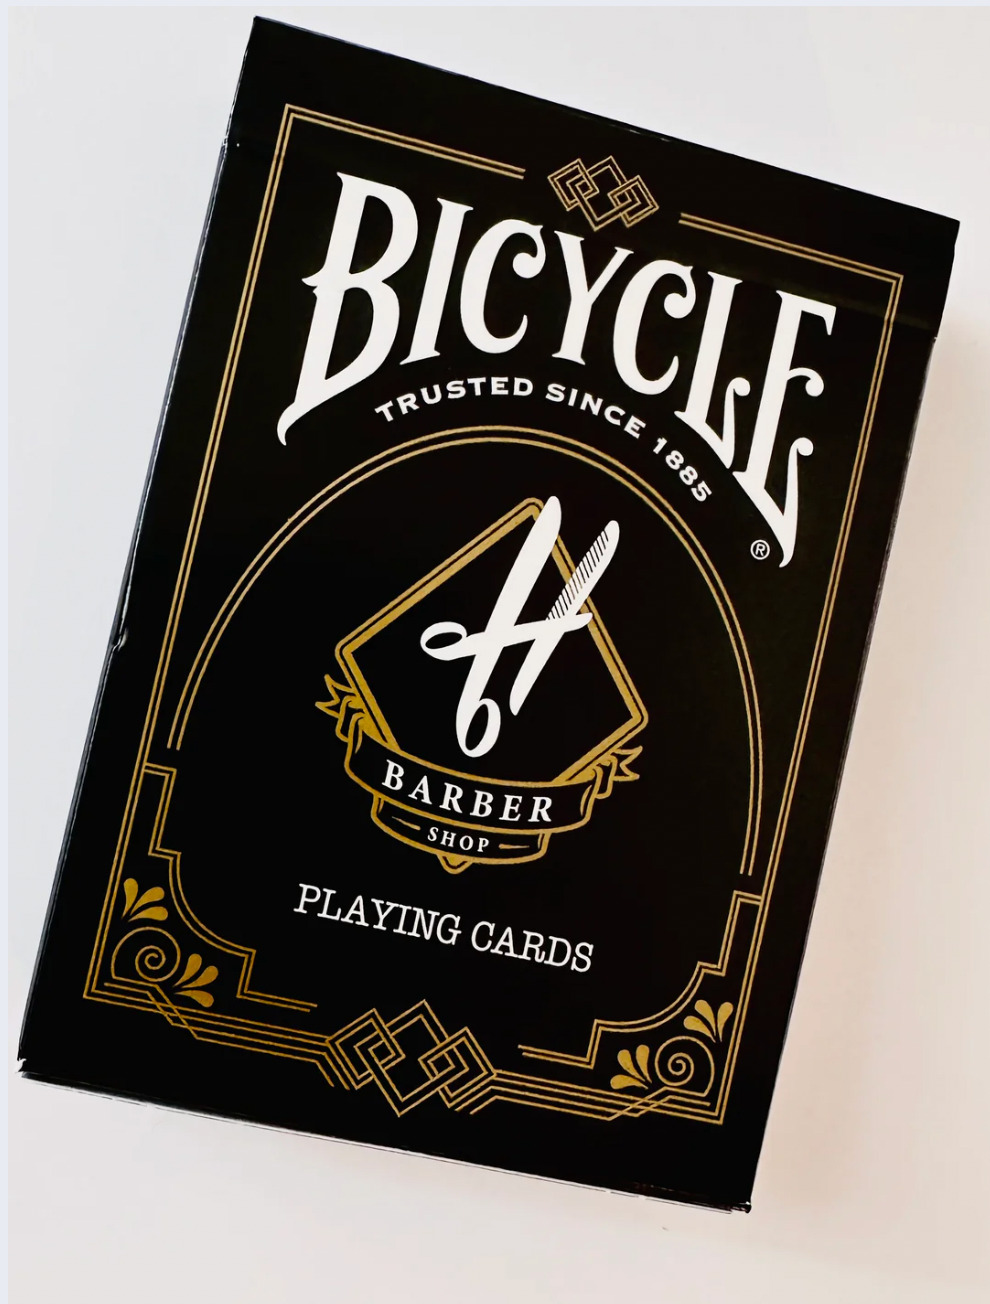 Bicycle Handsome Playing Cards Barber Shop Cards [ASIA IMPORT] SEALED Deck